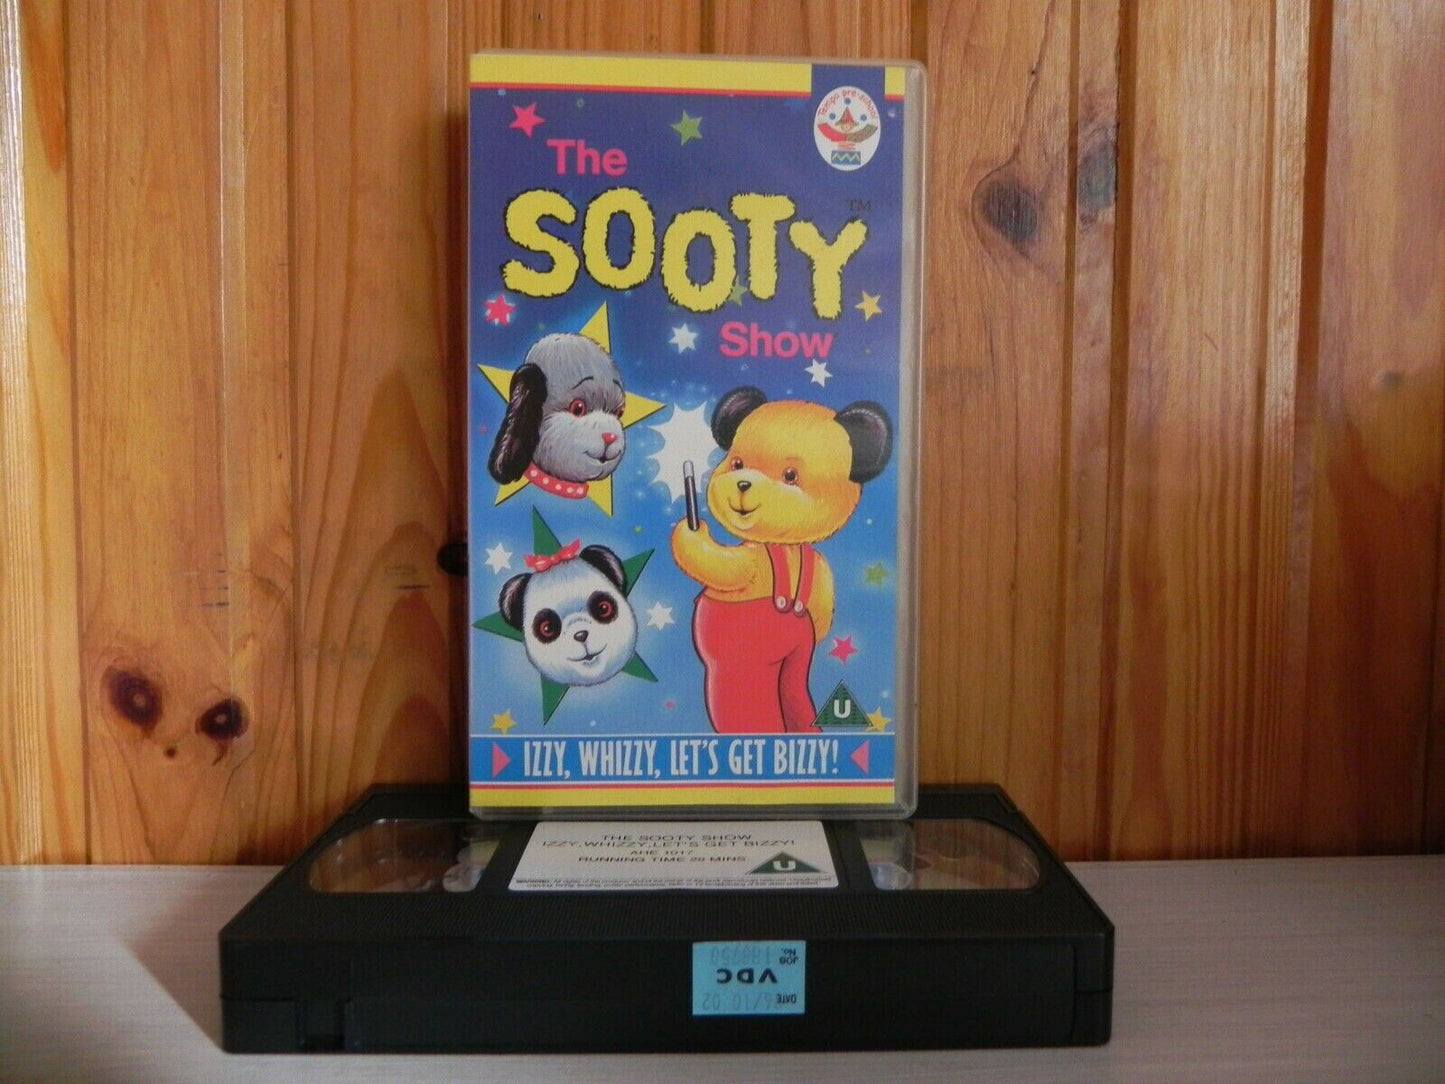 The Sooty Show: Izzy, Whizzy, Let's Get Bizzy - Action Video - Children's - VHS-